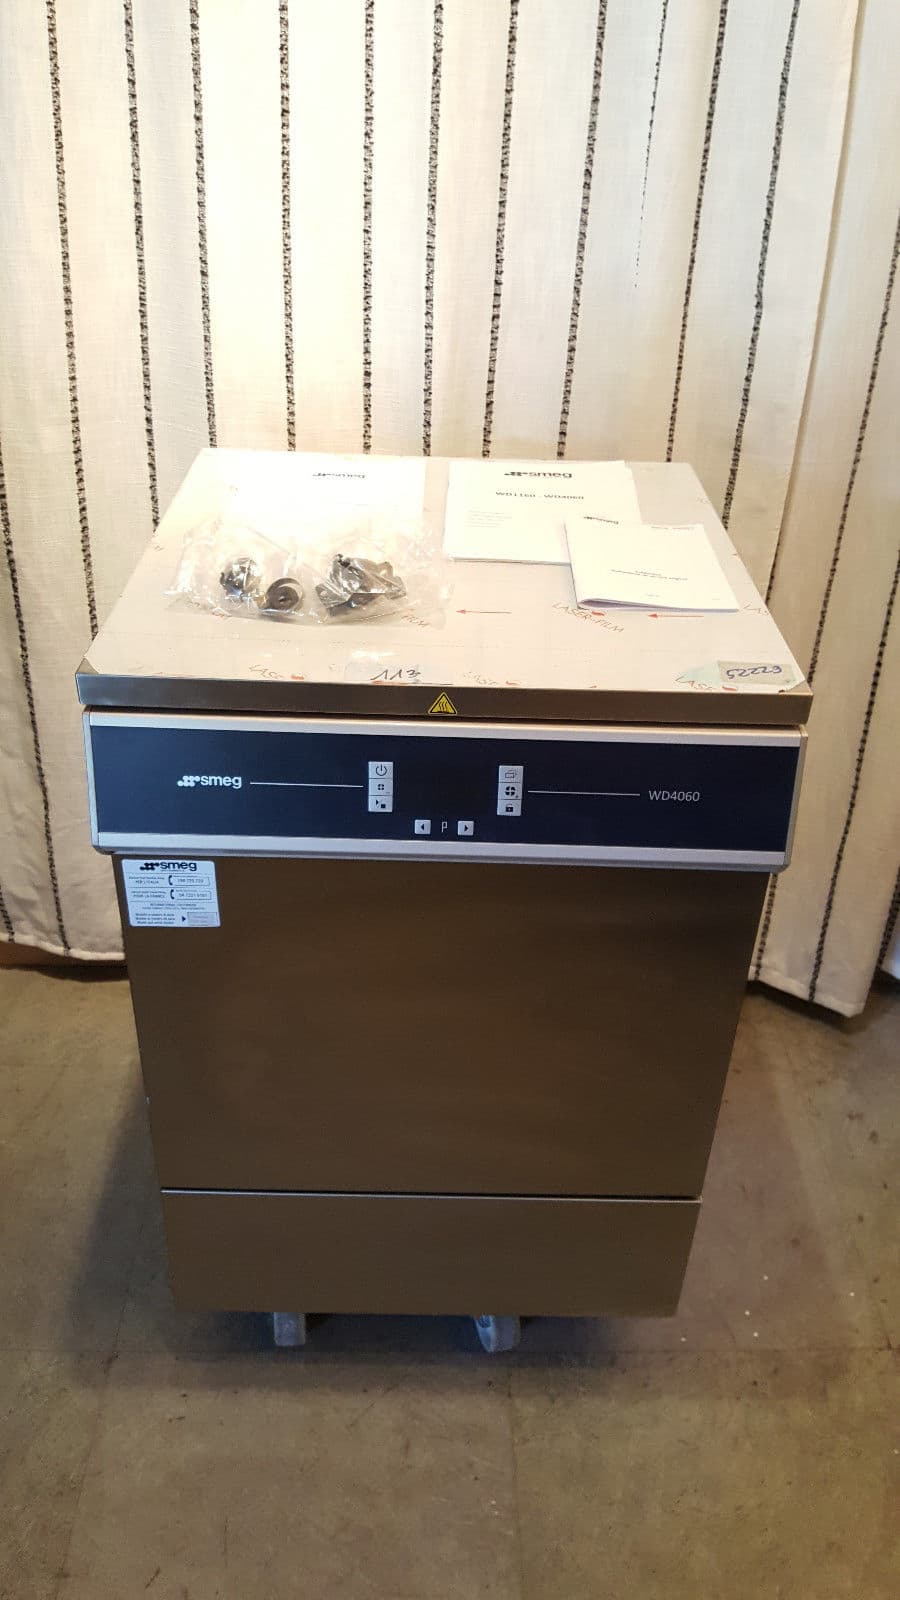 SMEG WD4060 _D_ WASHER DISINFECTOR _Year 2014_____2000_